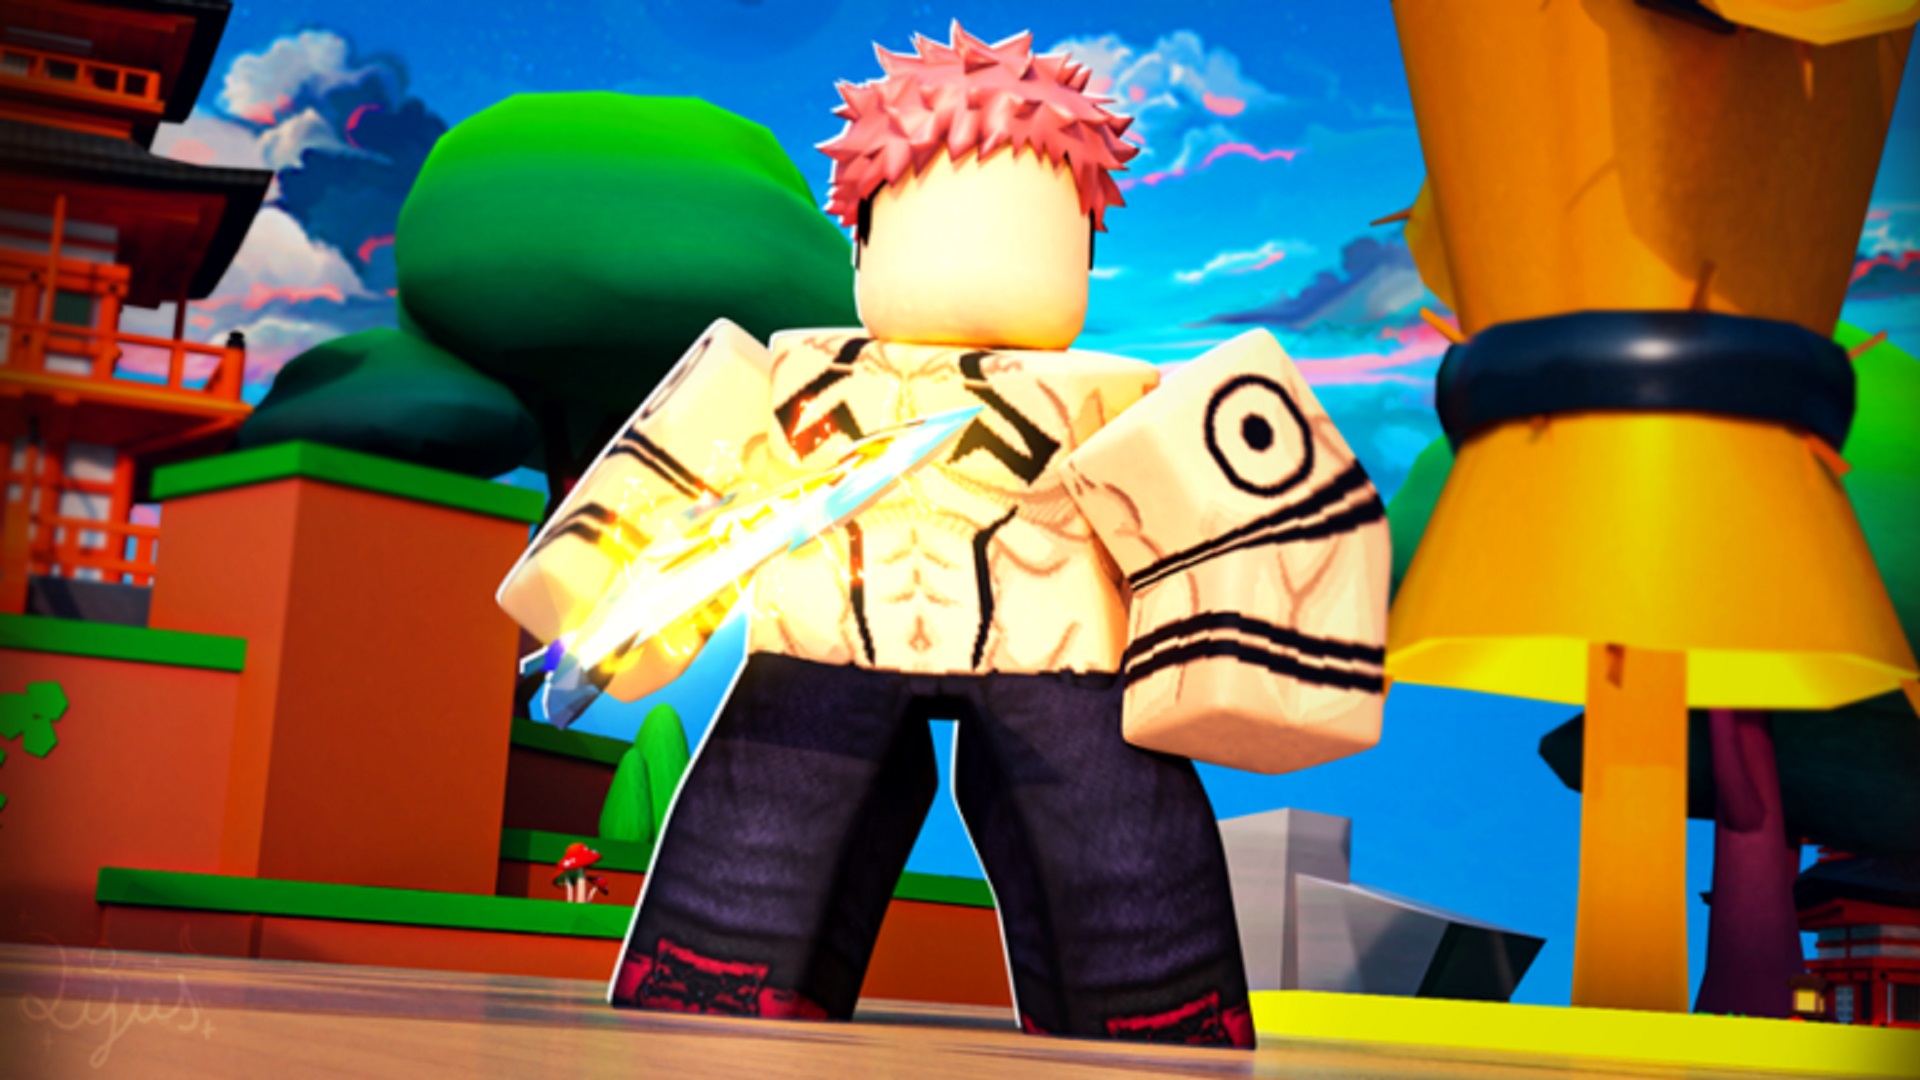 NEW* SWORD STYLES SPECIAL UPDATE & HOW TO GET! IN ANIME FIGHTING SIMULATOR!  (ROBLOX) 